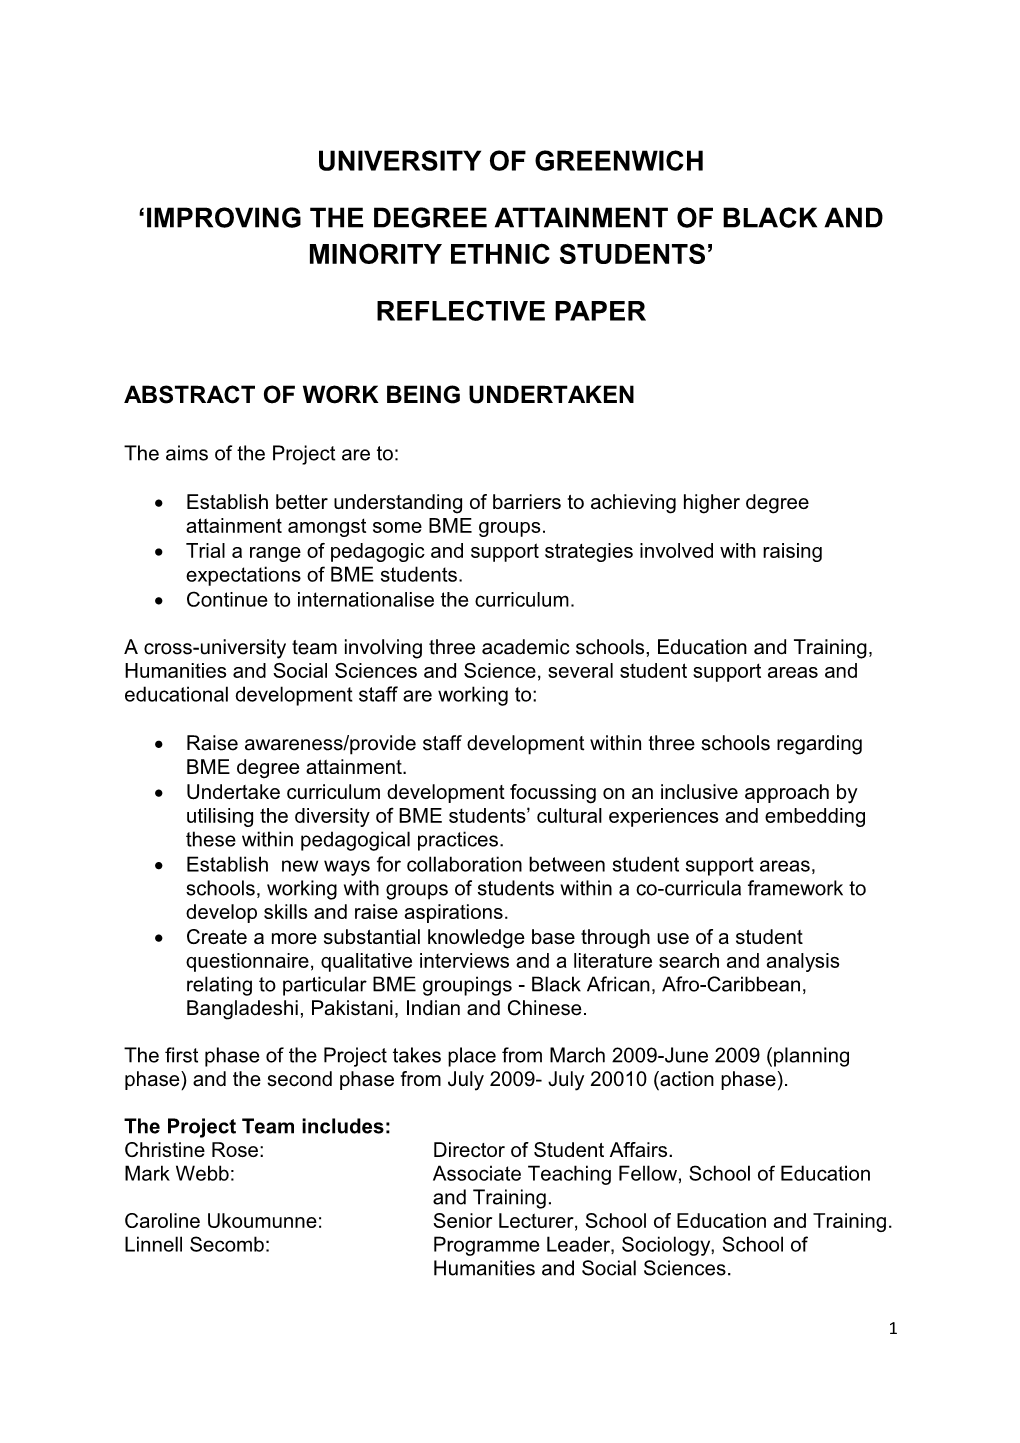 Improving the Degree Attainment of Black and Minority Ethnic Students